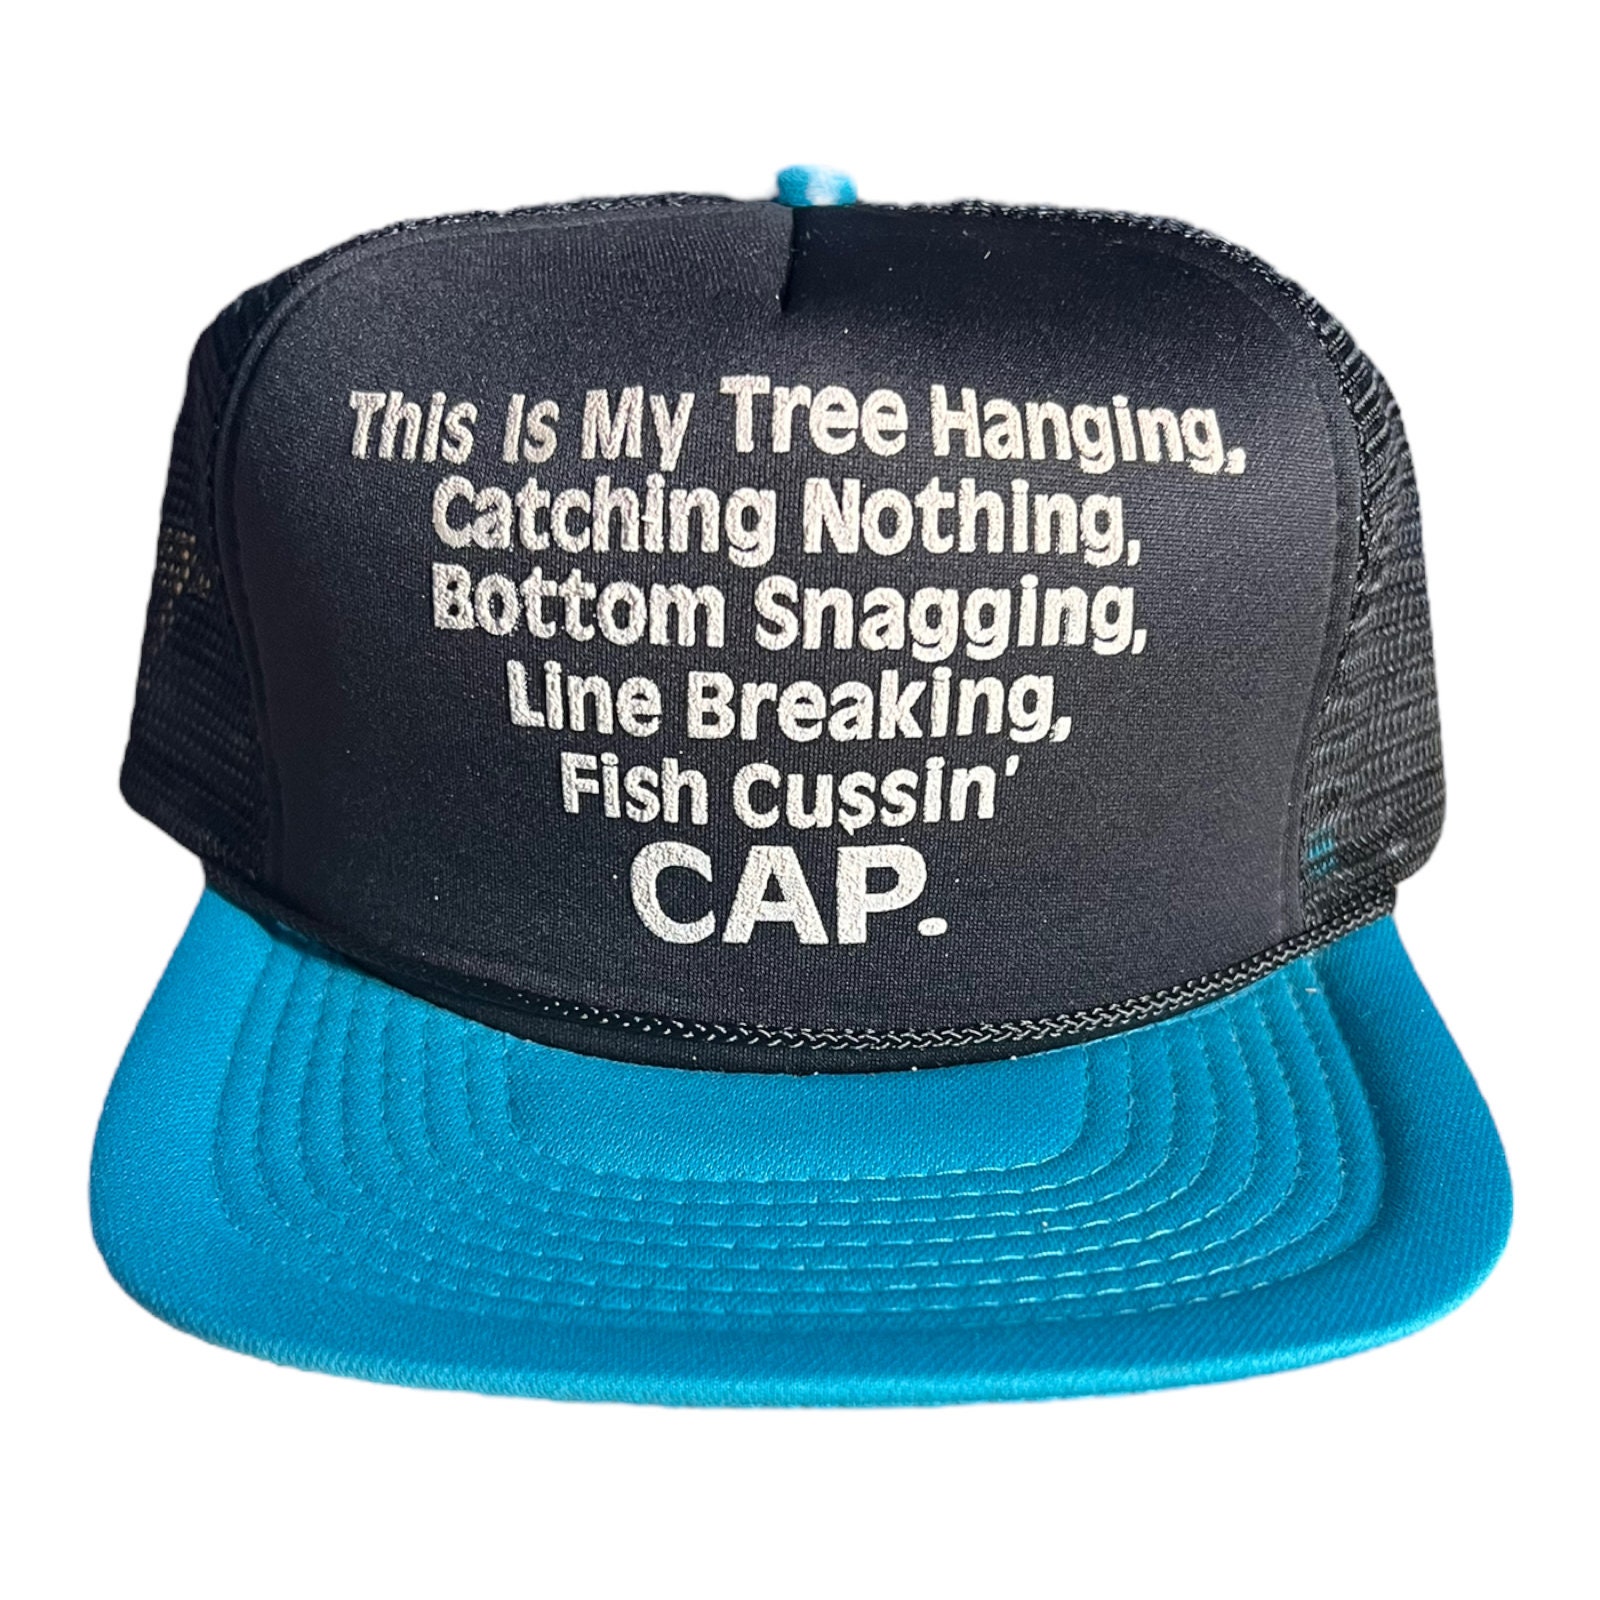 Vintage Trucker Hat // This Is My Tree Hanging, Catching Nothing, Bottom Snagging, Line Breaking Fish Cussin Cap // Funny Fishing Hat Cap